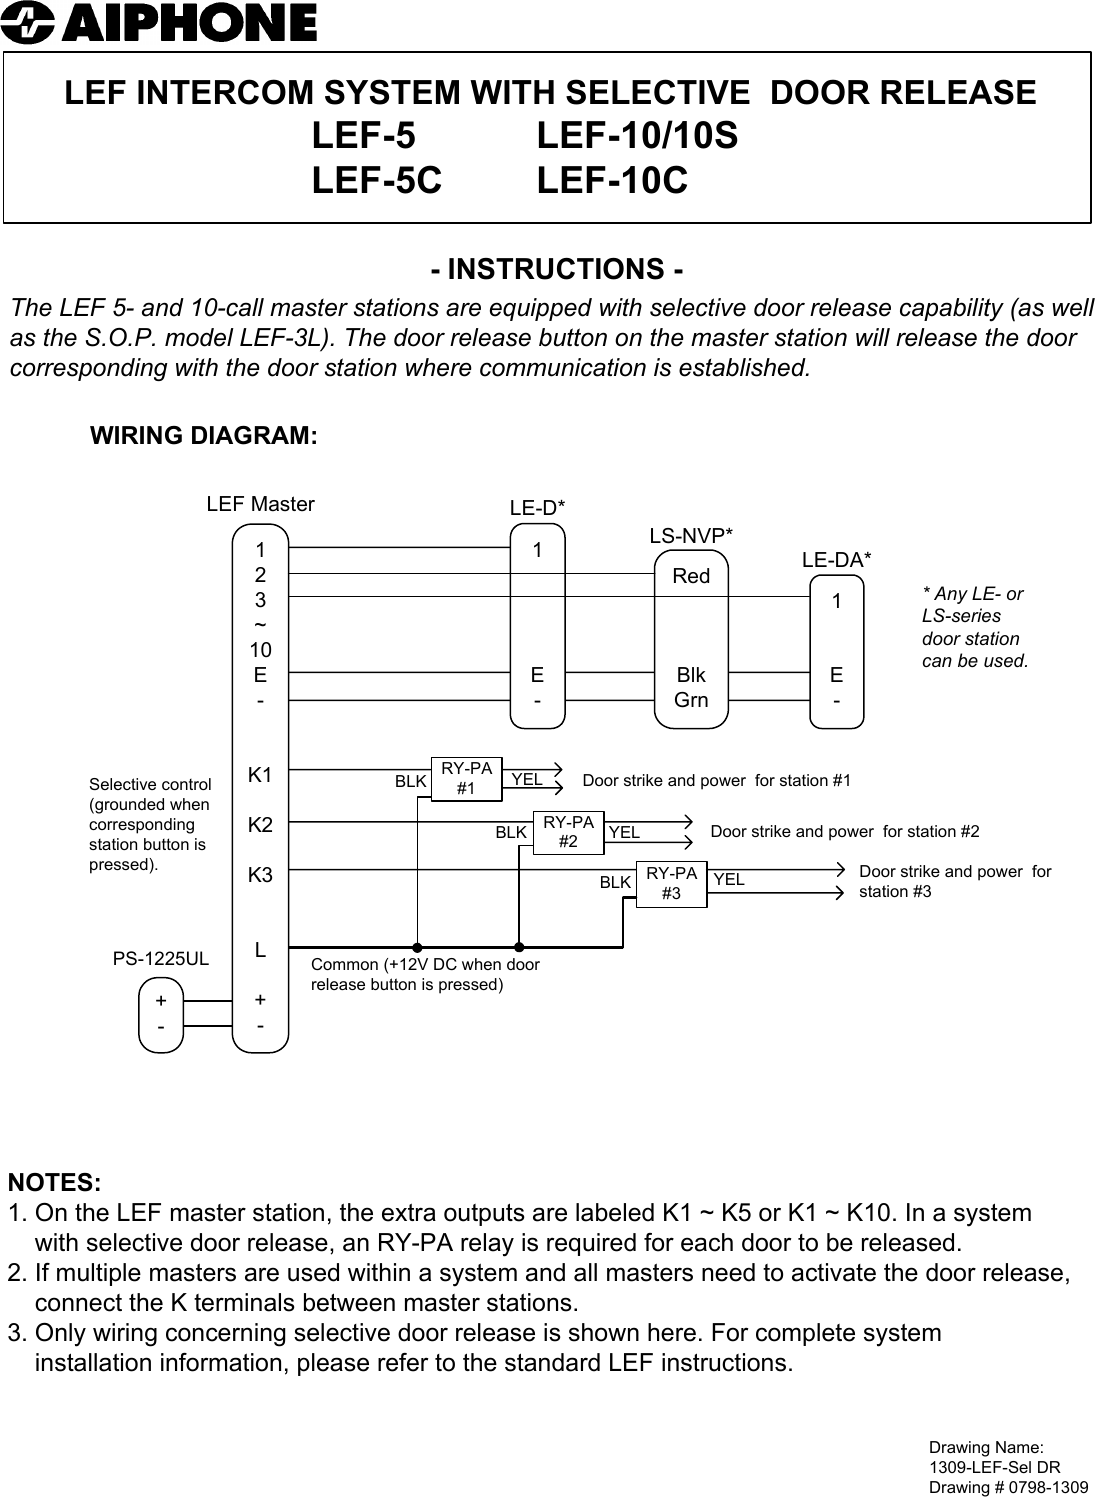 Page 2 of 2 - Aiphone Sheet LEF-1309 Selective Door Release LEF-1309-Selective-Release